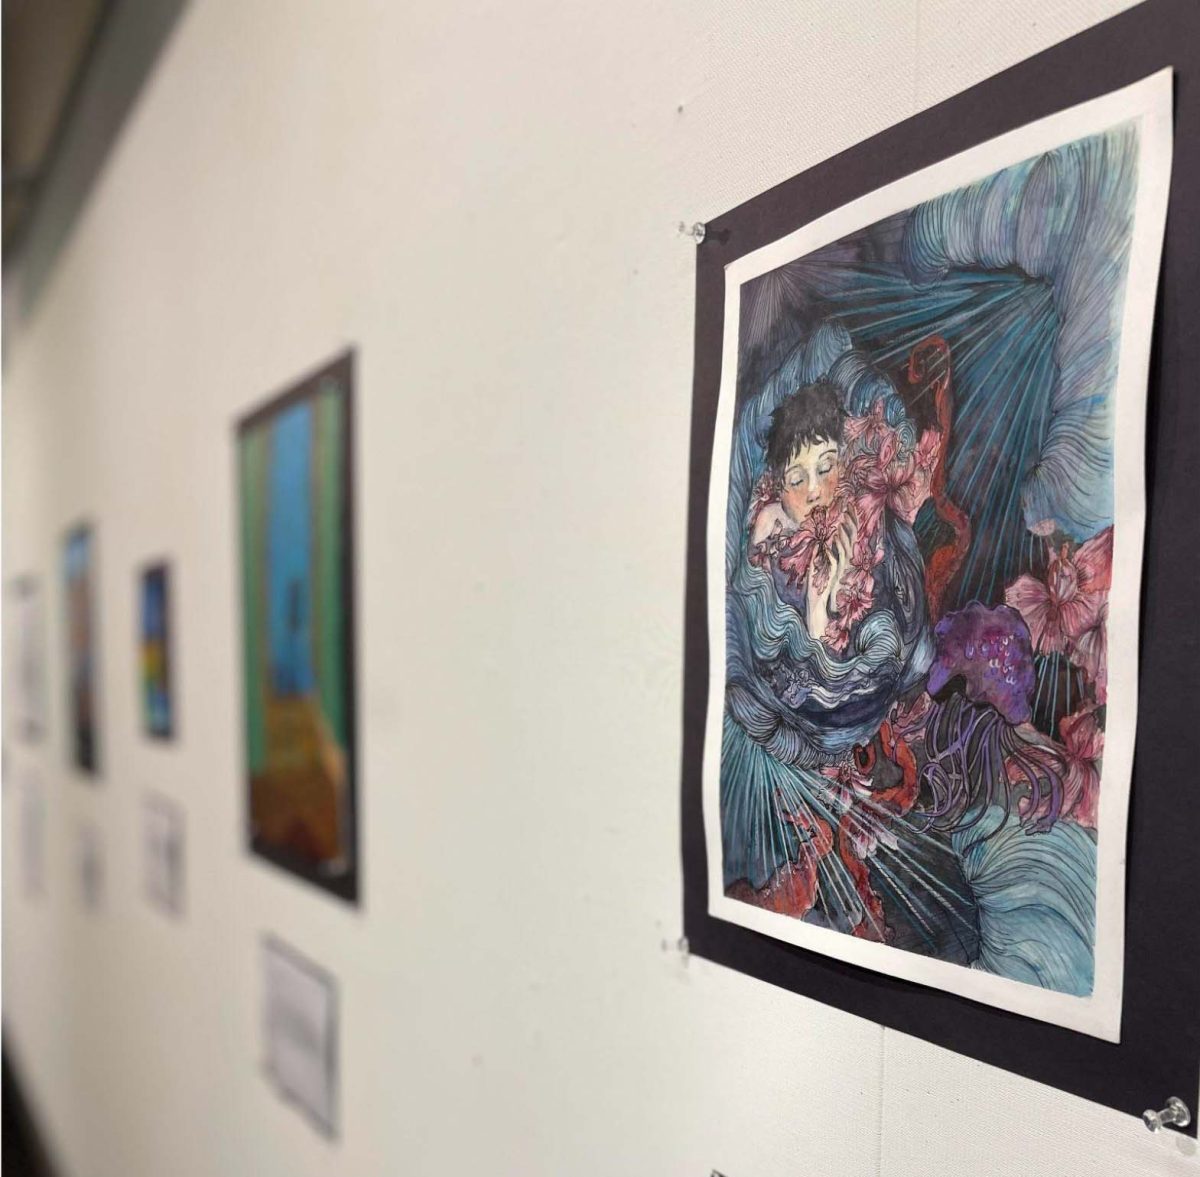 Cruz’s installation, “Floating Piece,” hangs in Marlborough’s Seaver Gallery at the “In the Stillness of Remembering” show from Monday, Oct. 11 to Friday, Nov. 5 alongside the work of other student artists.